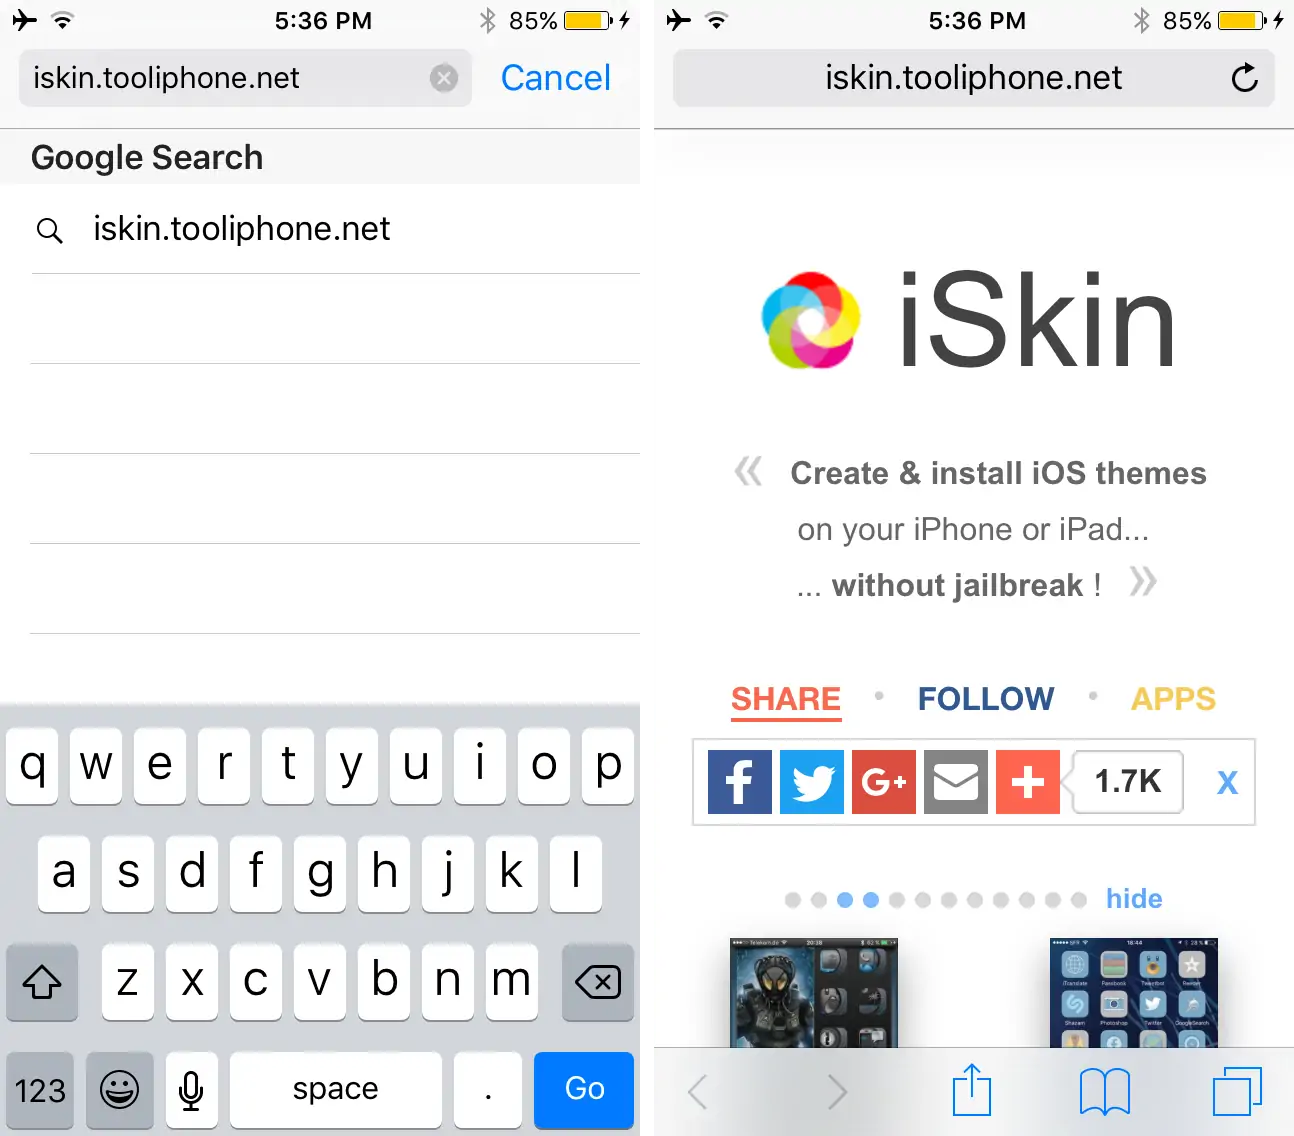 install themes on your iPhone without jailbreak